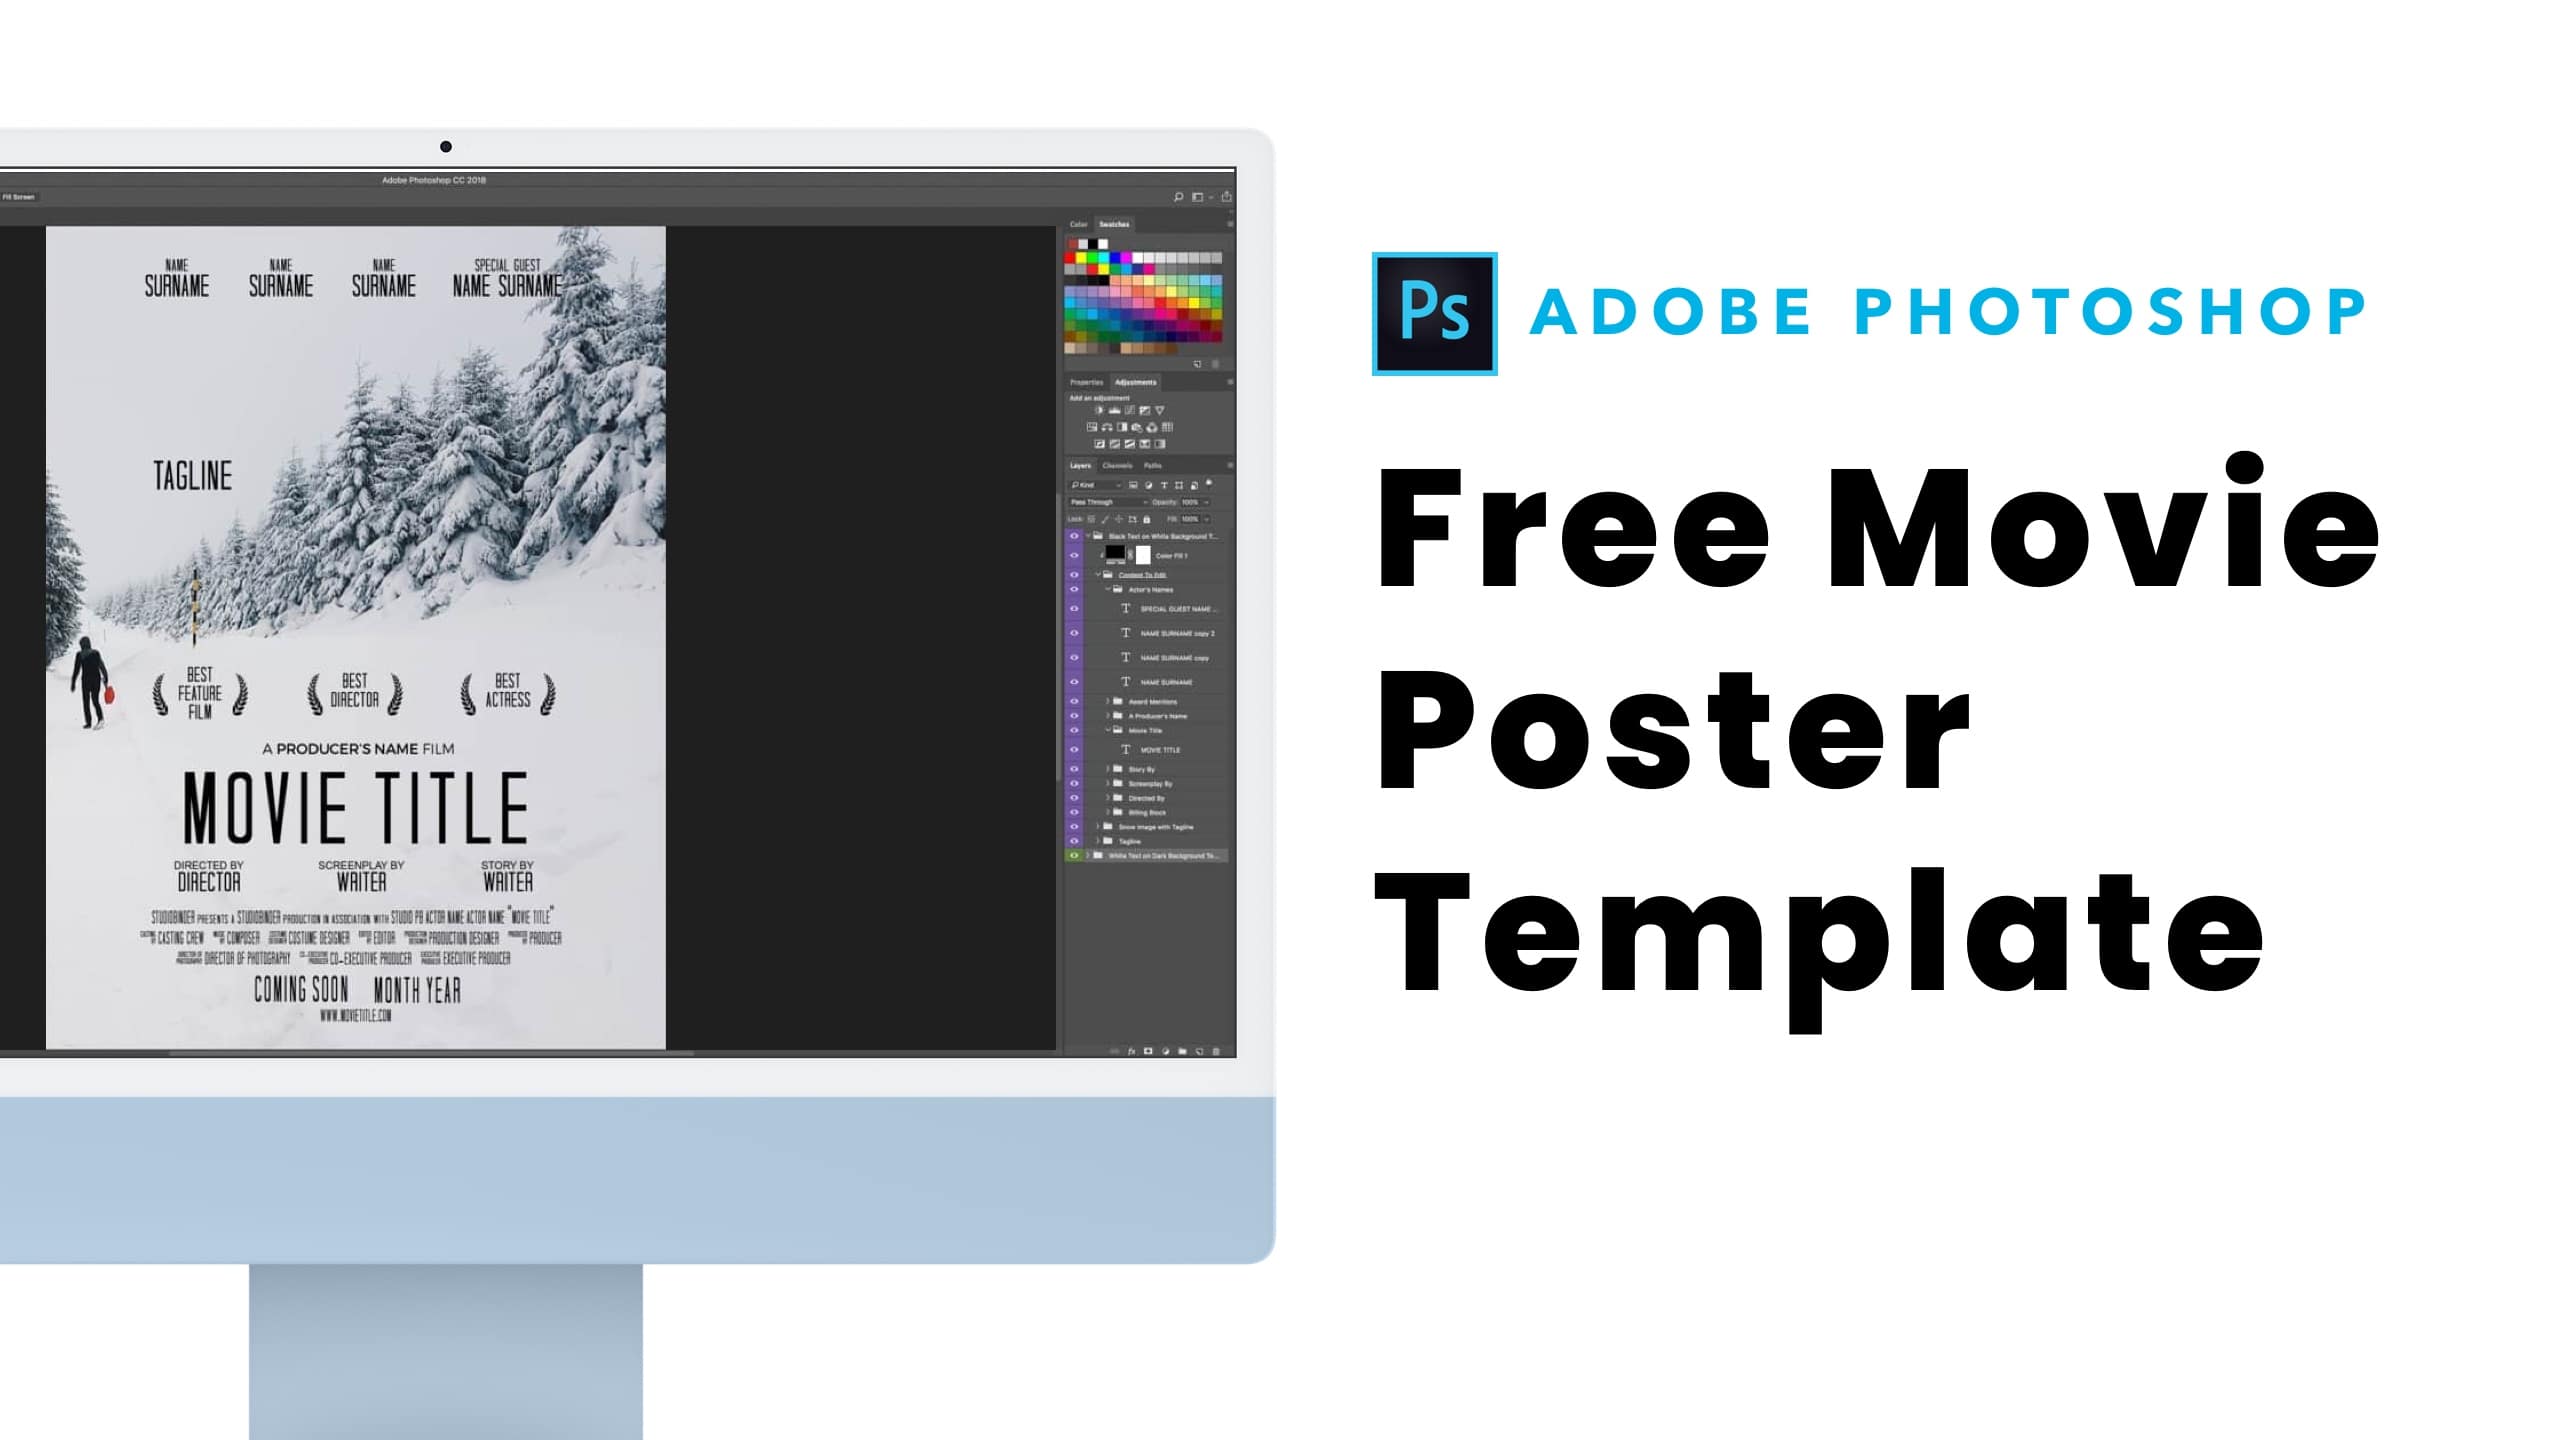 how to get photoshop for free redit